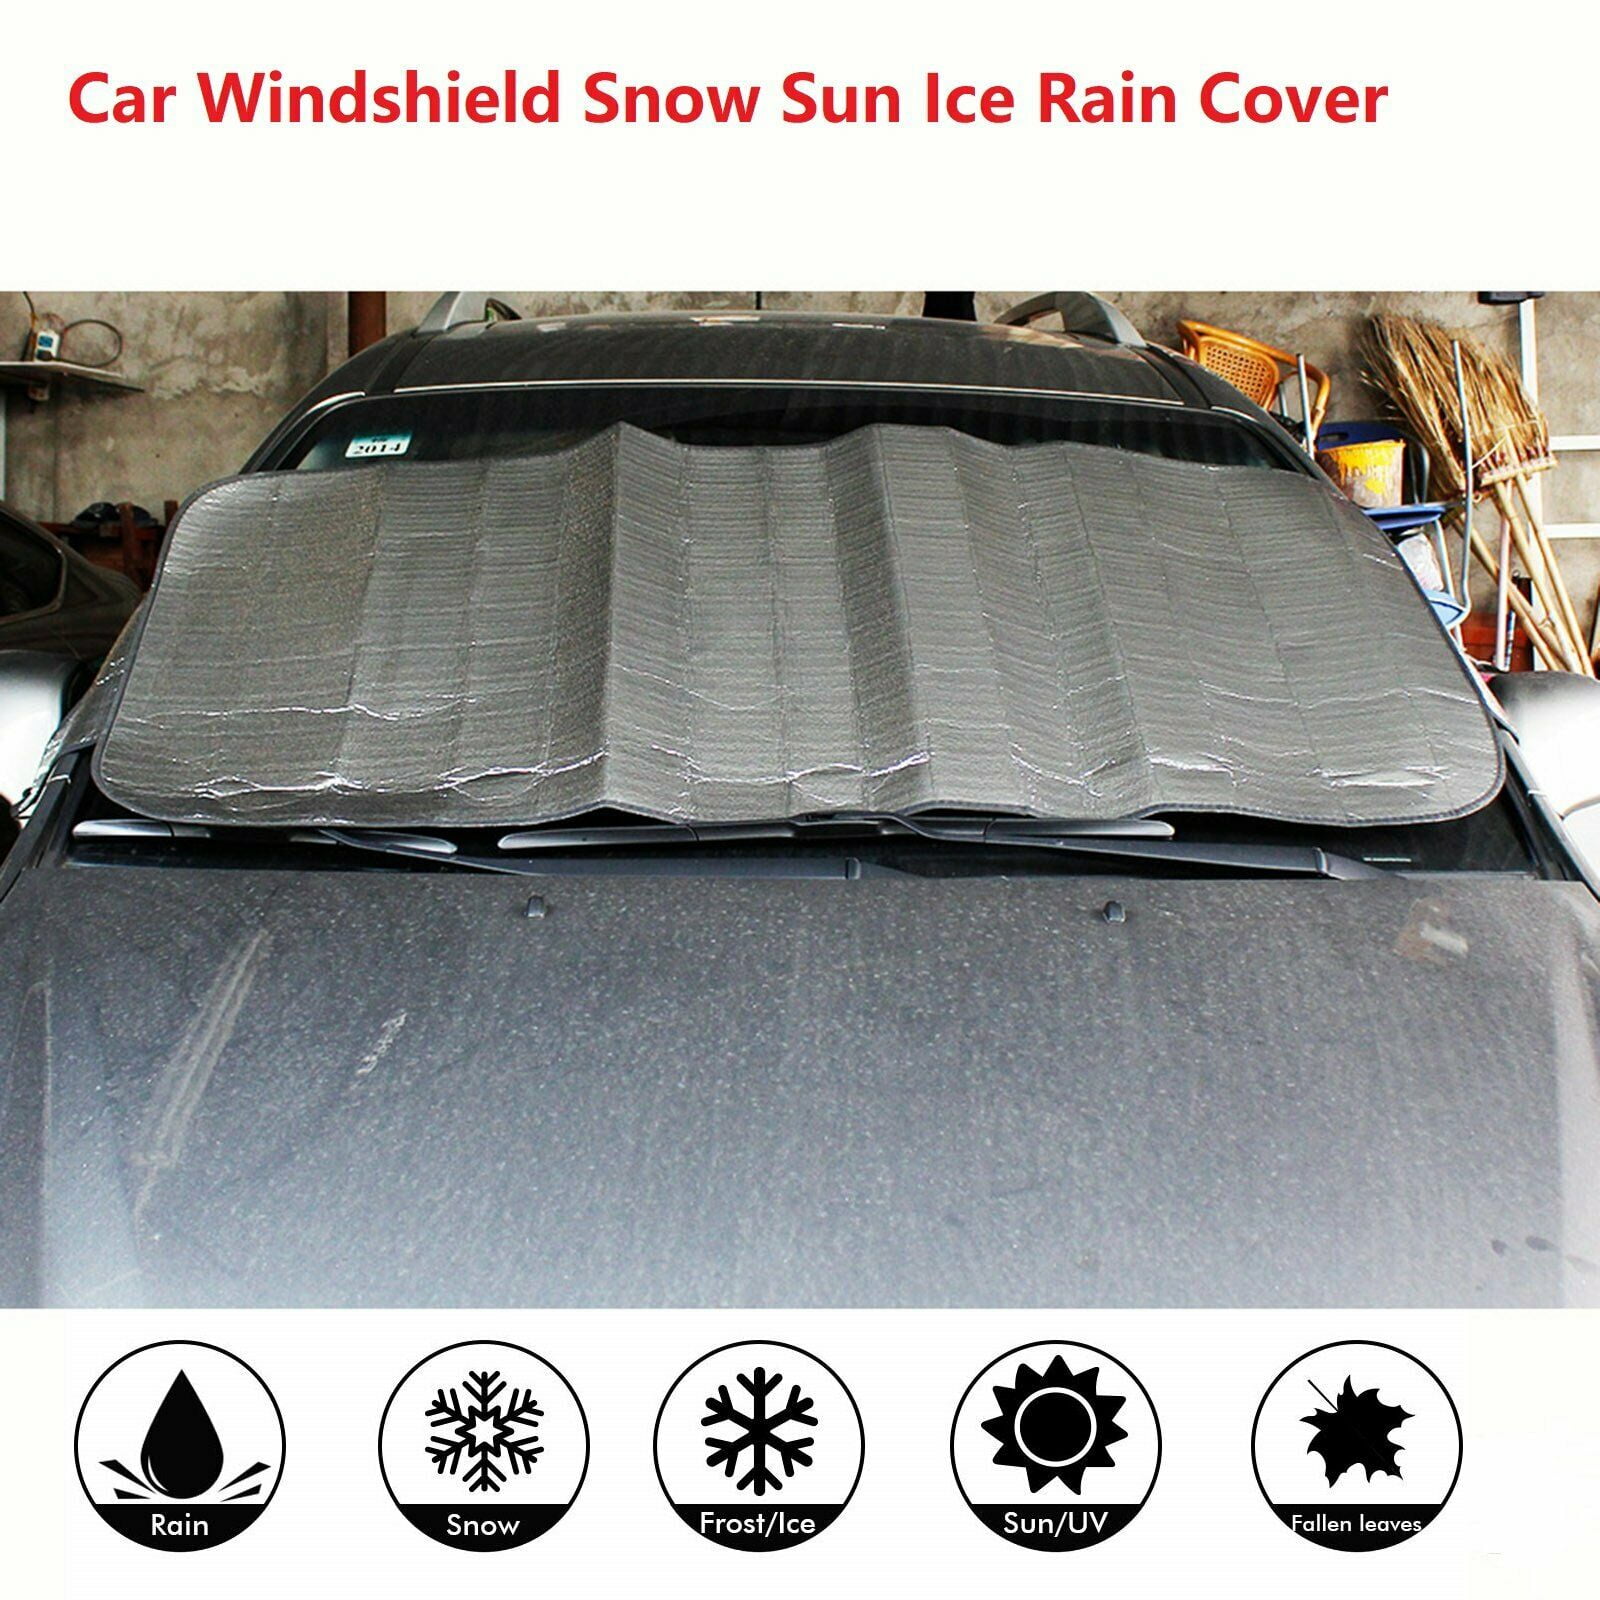 Car Windshield Snow Cover Winter Ice Frost Guard Sunshade Protectoha 